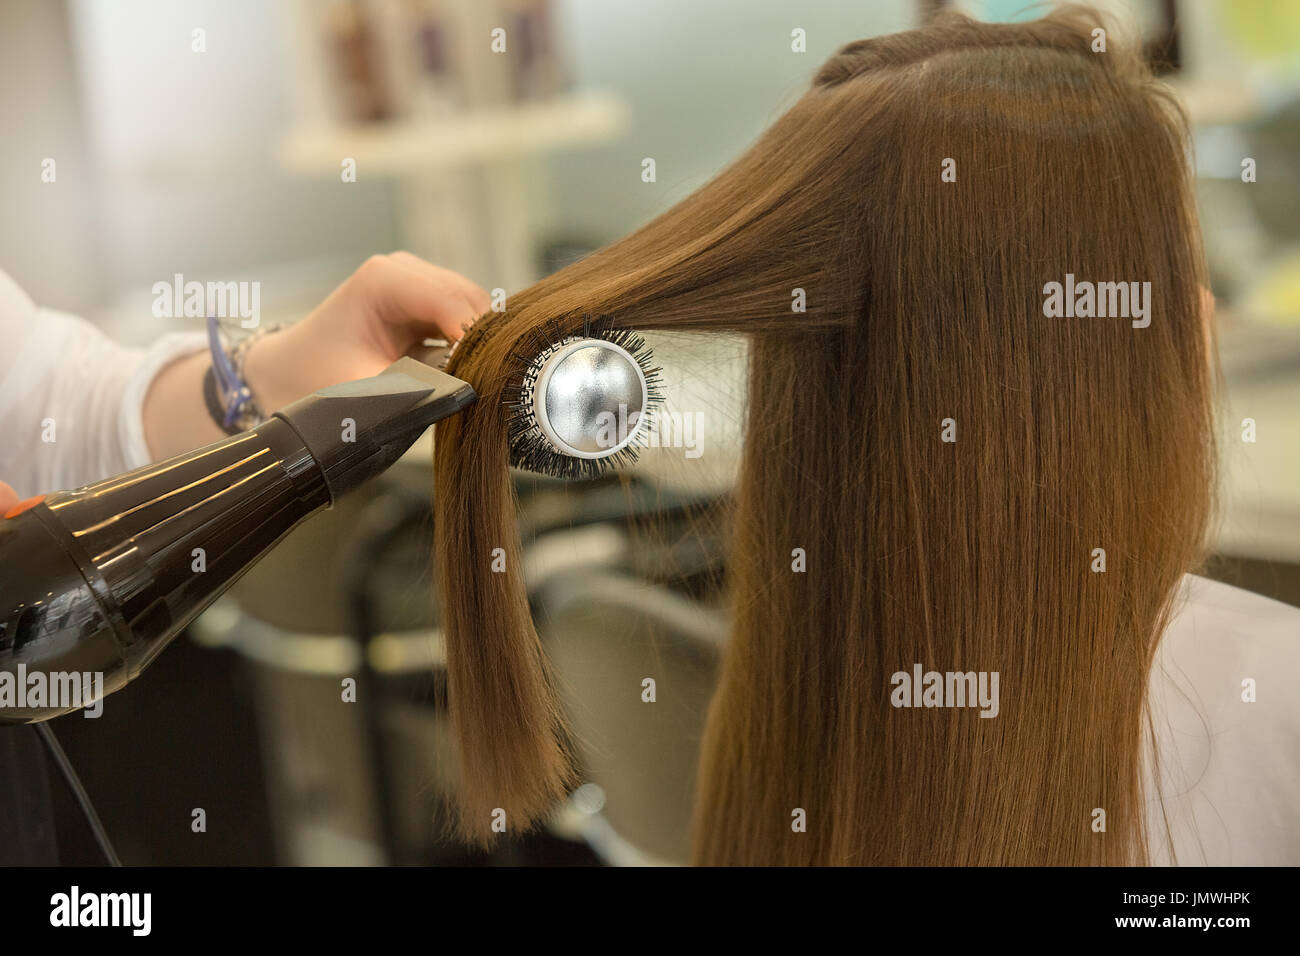 Young female sitting in hair salon hairdo styling hair dry Stock Photo